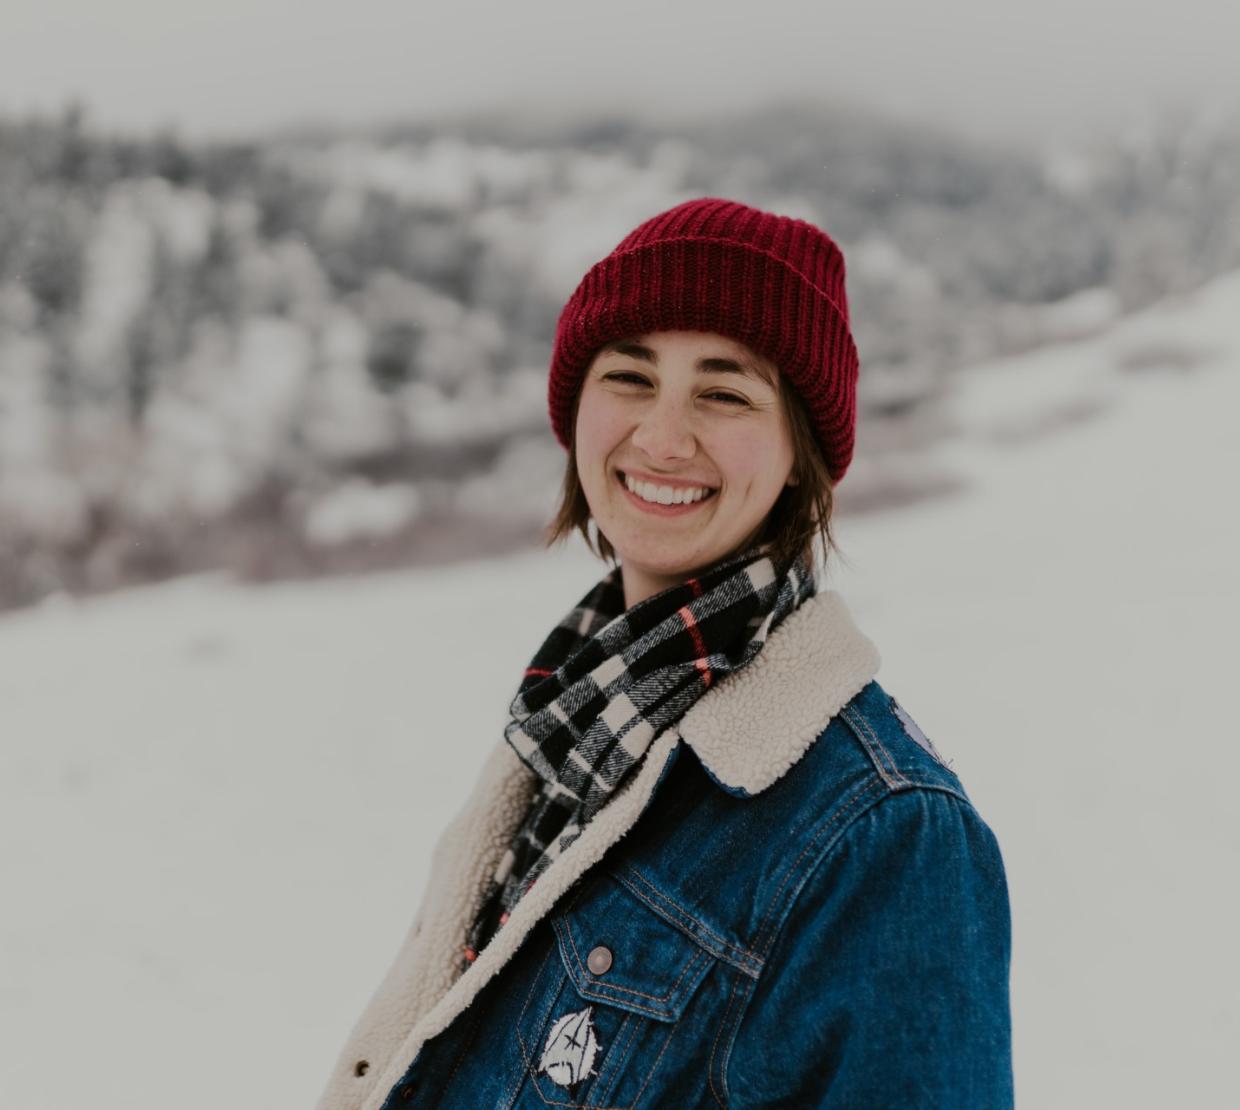 Megan Tucker smiles widely, her scarlet beanie a striking contrast to the snow-covered mountaintops that rise behind her.